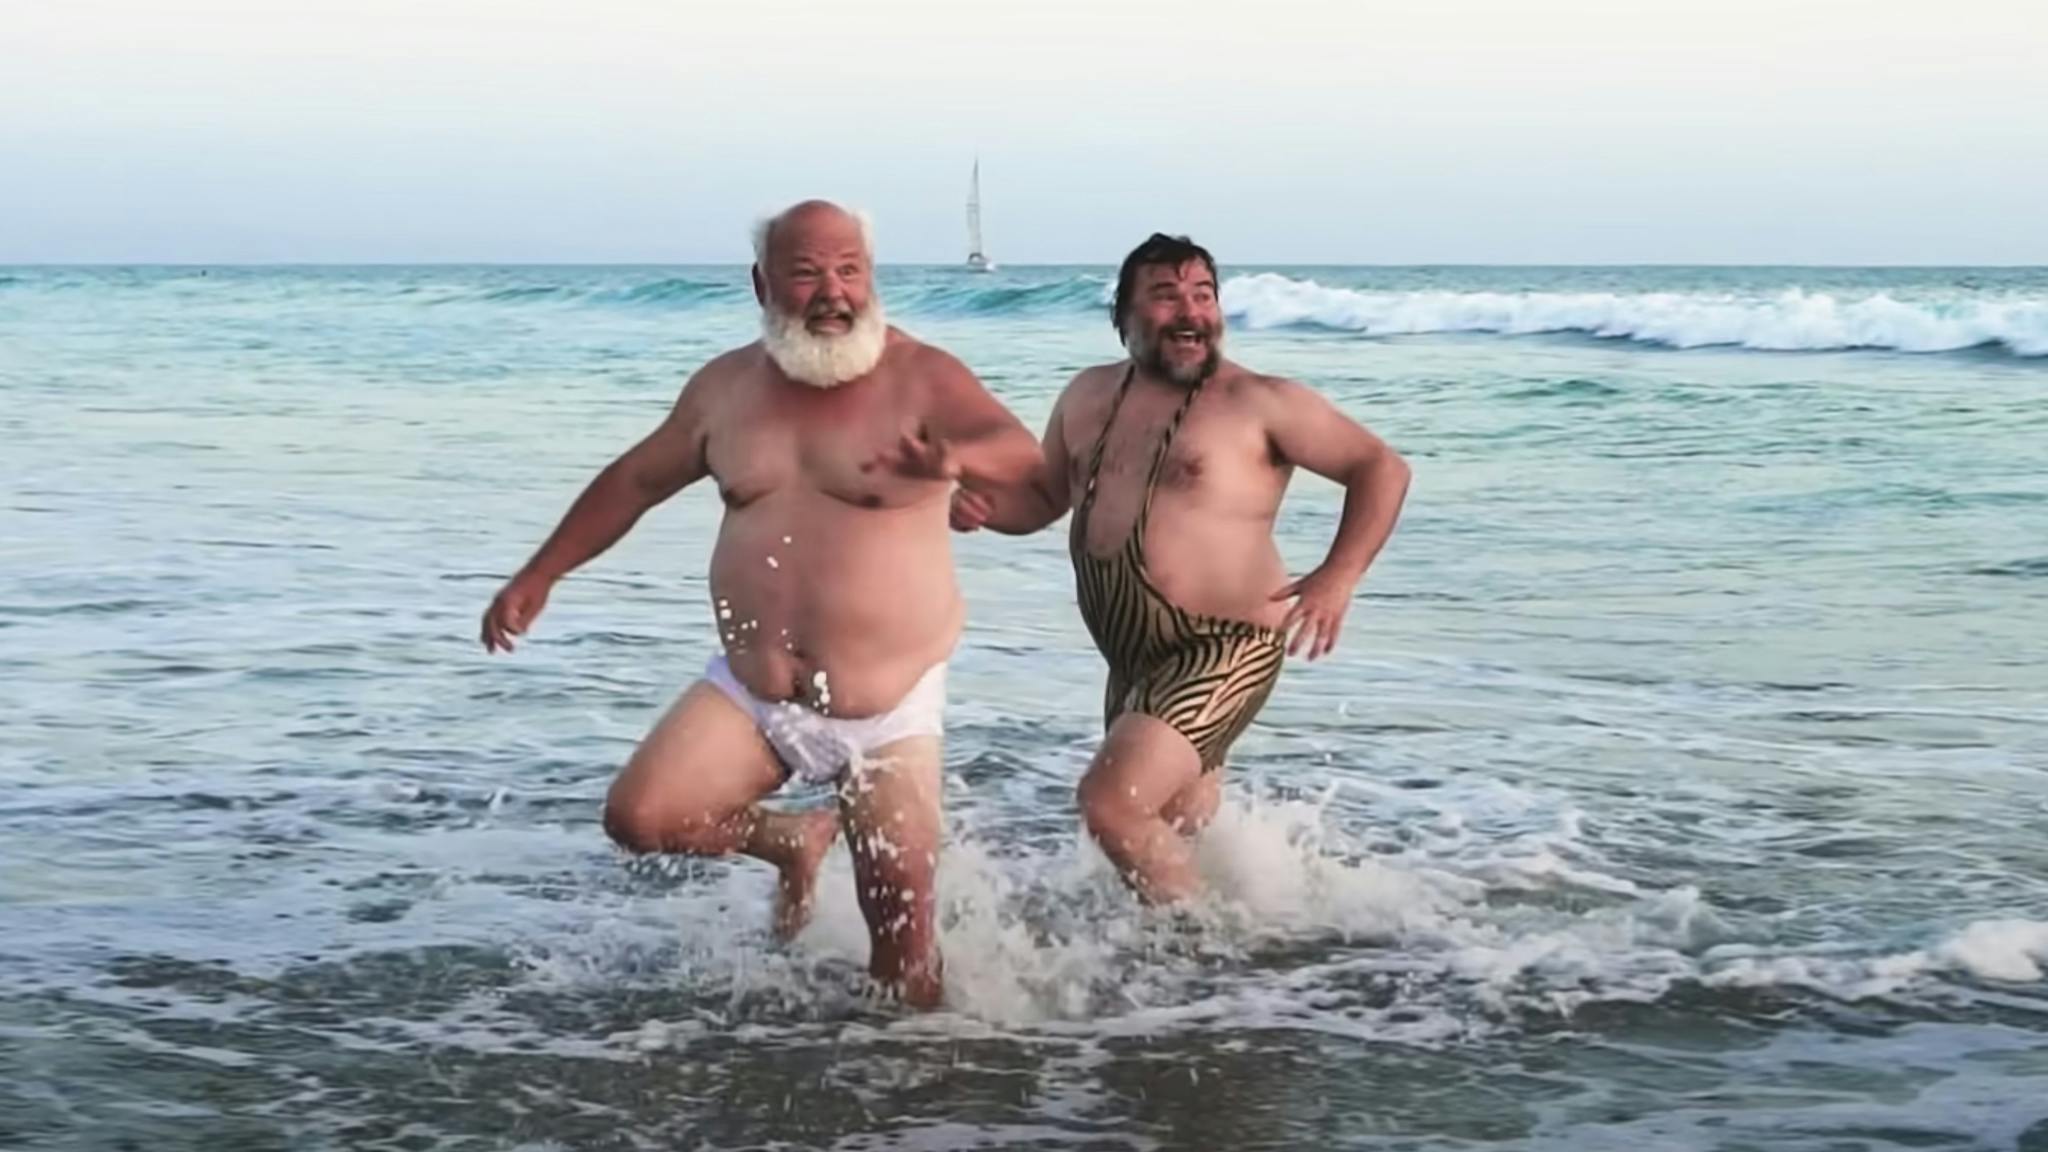 Tenacious D release official Wicked Game cover, plus majestic music video